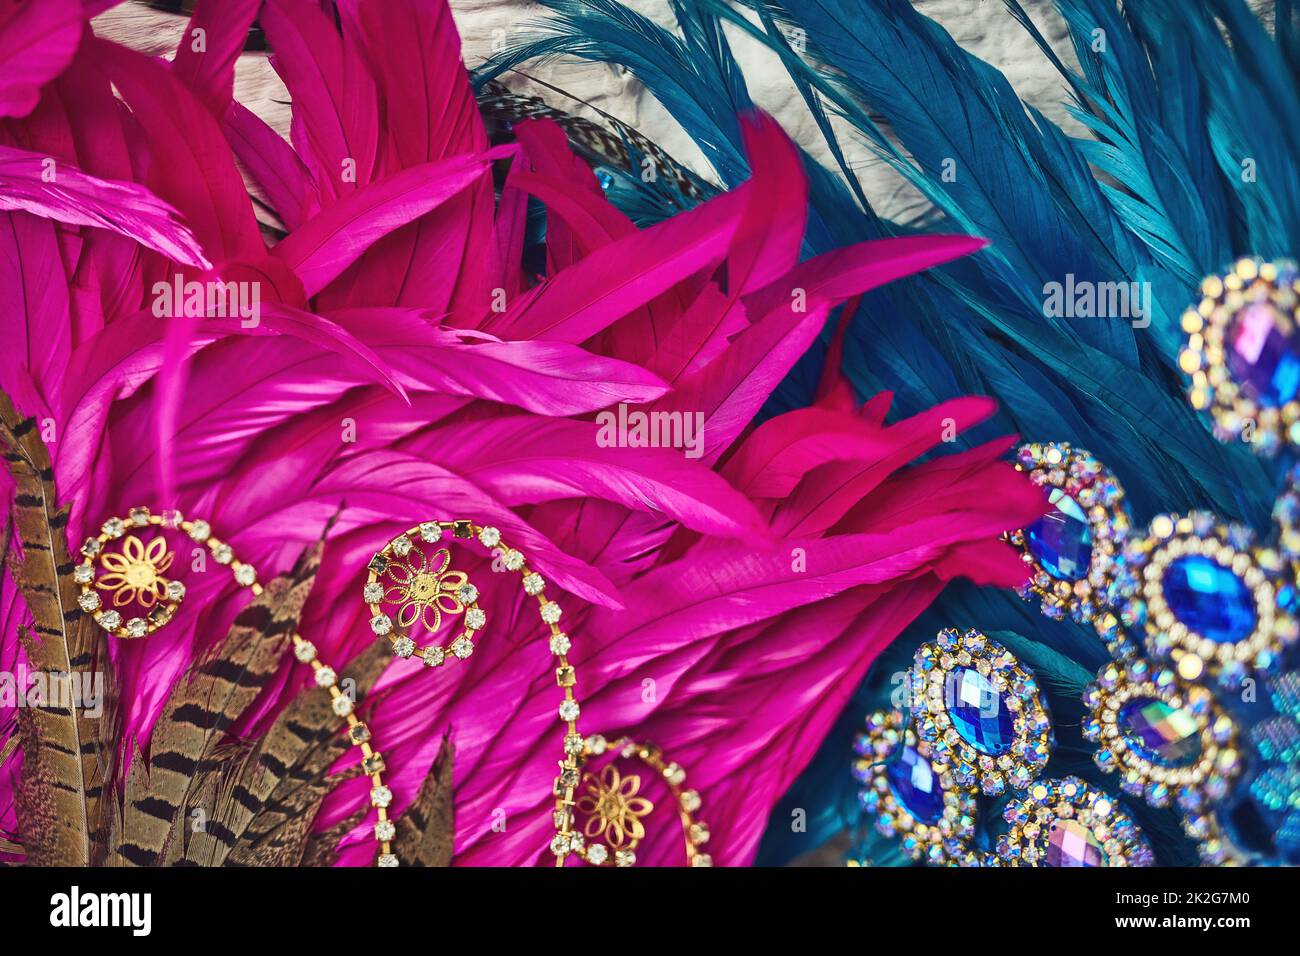 The beauty of extravagance. Still life shot of costume headwear for samba dancers. Stock Photo